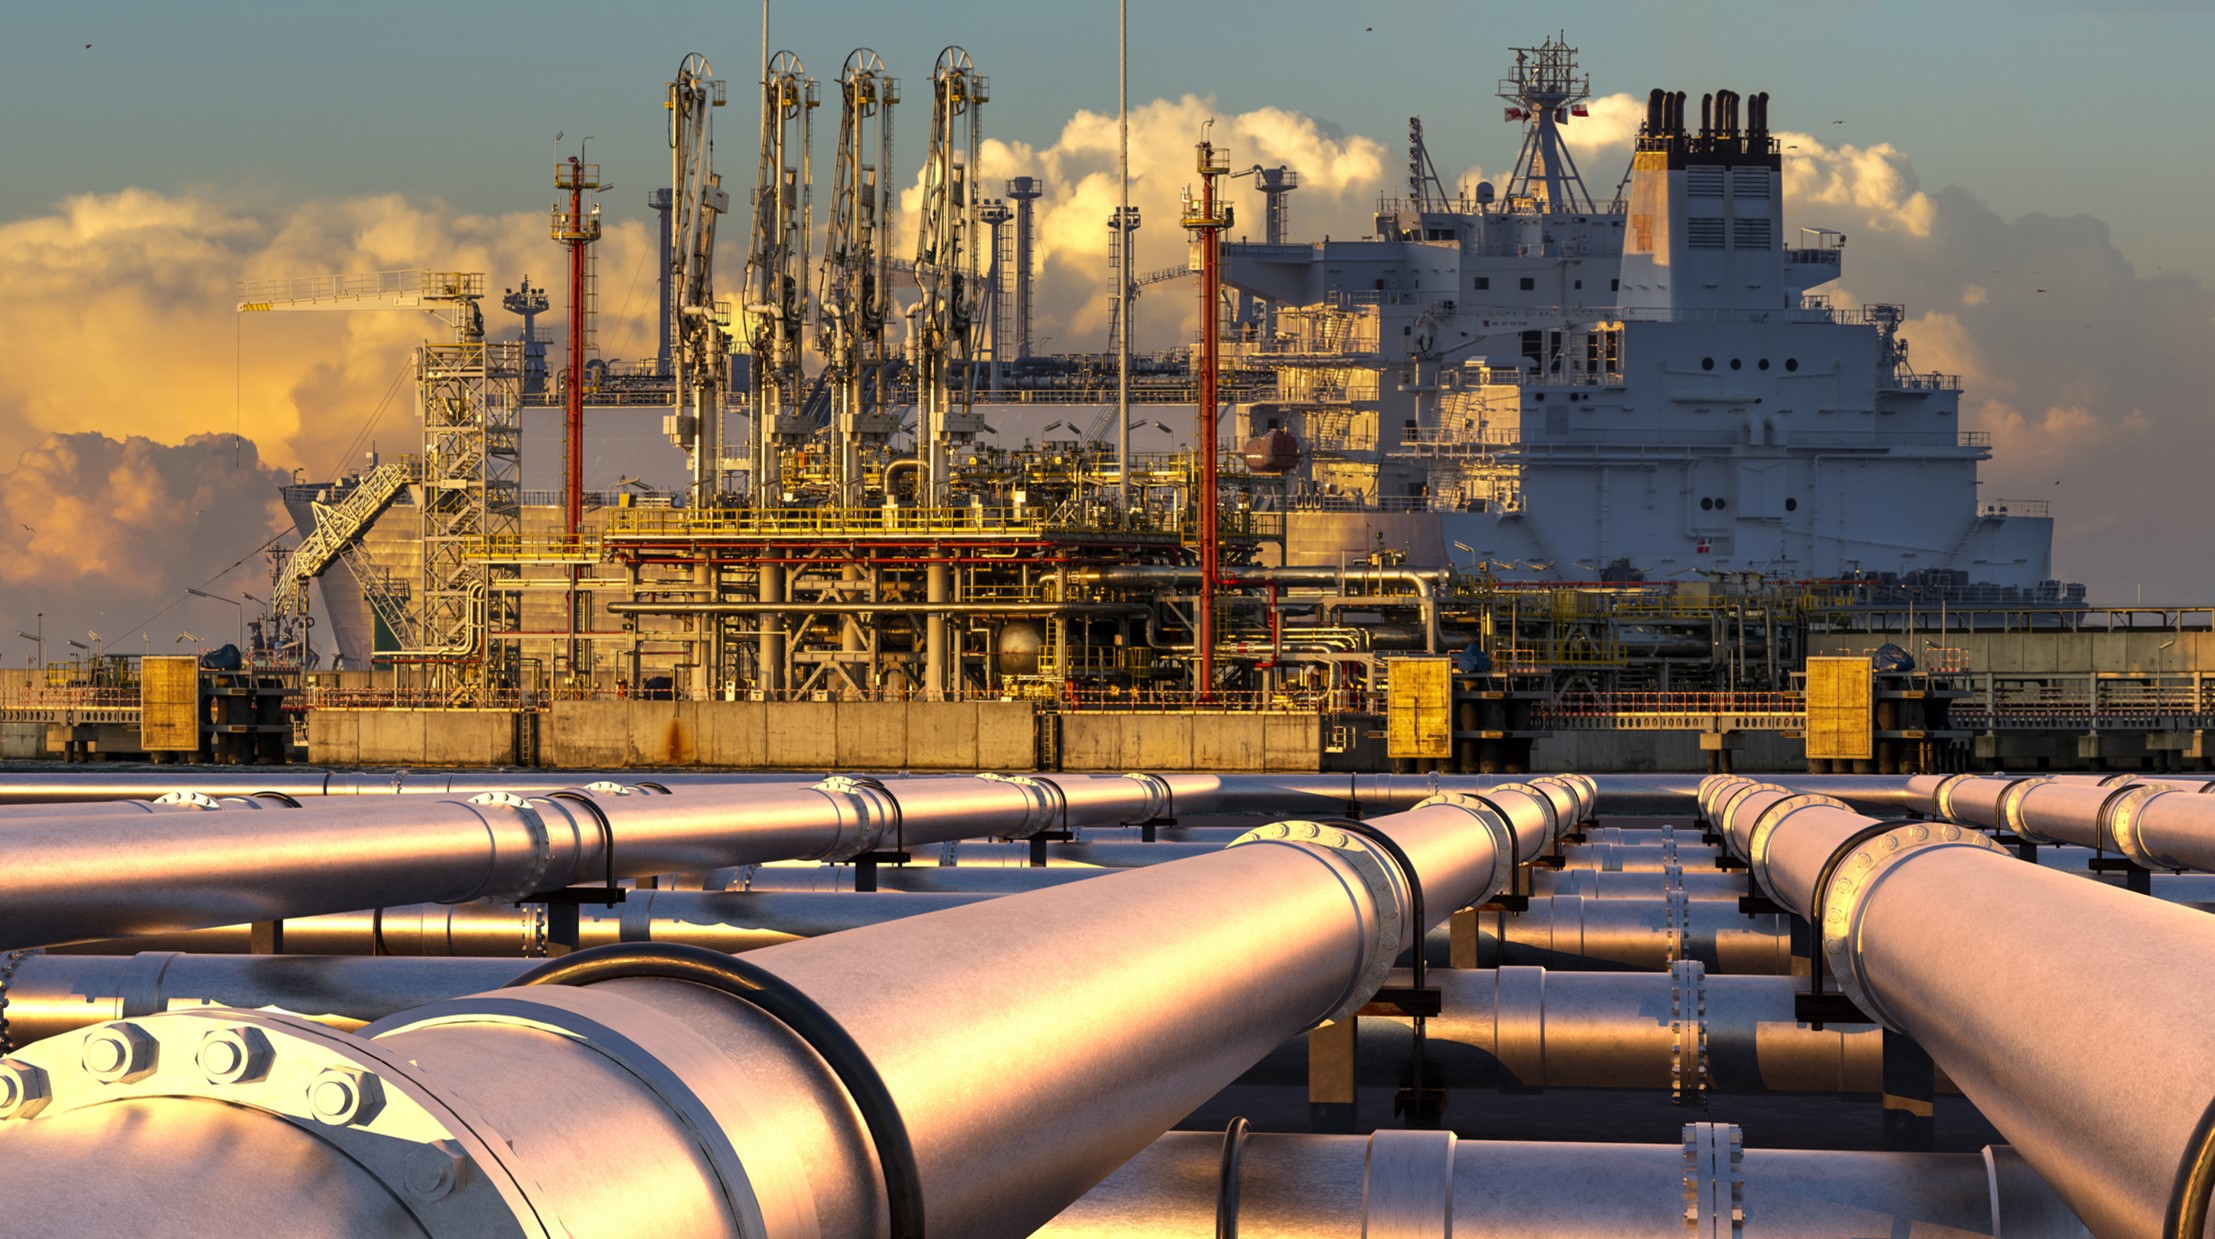 A stock image of pipelines and heavy industrial facility in the background